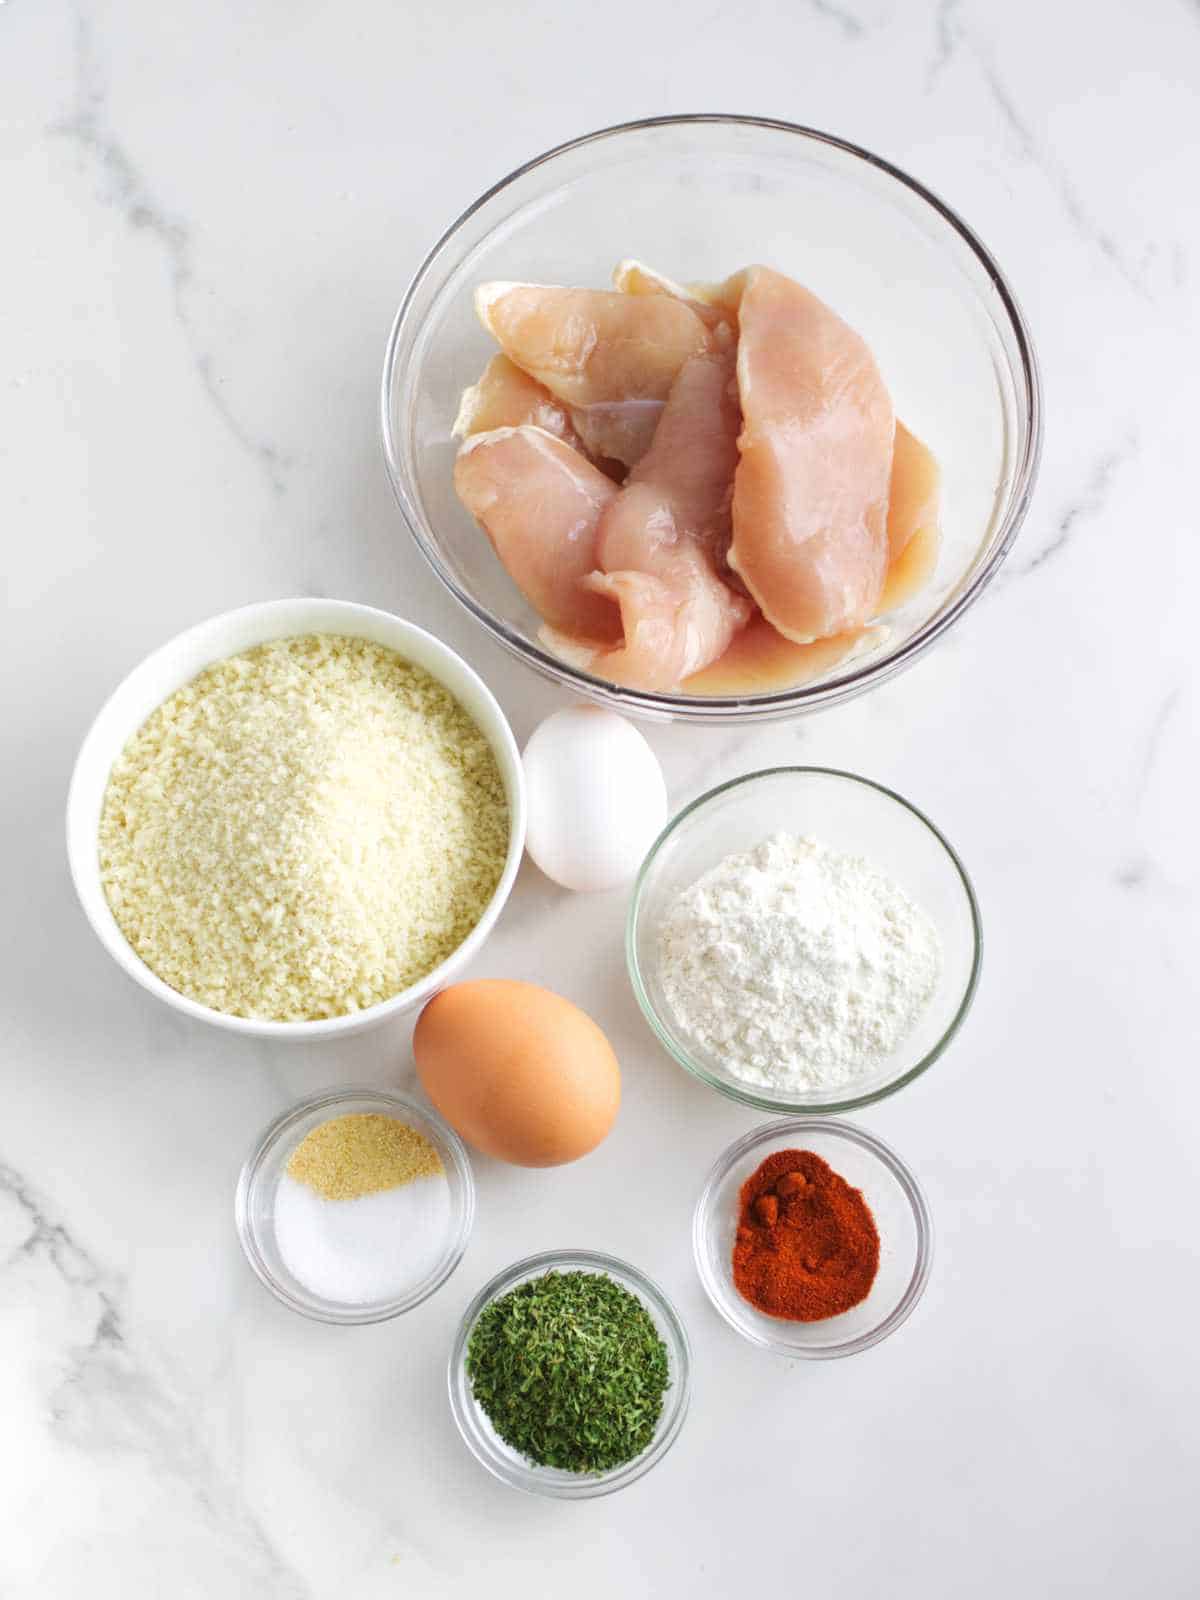 ingredients for making chicken cutlets with panko crumbs.